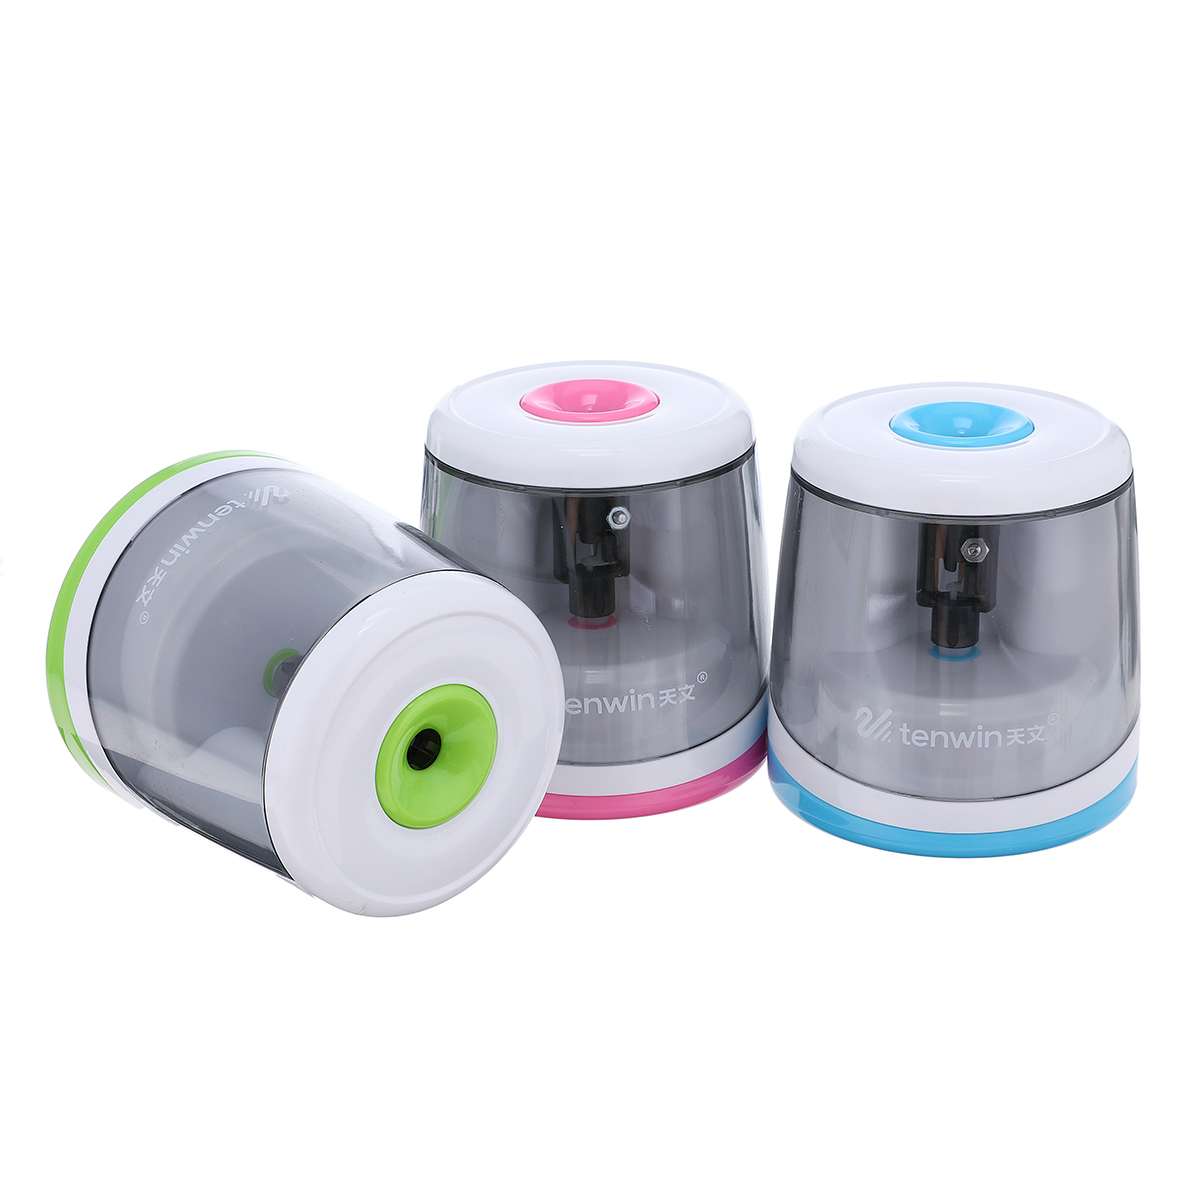 

Electric Automatic Pencil Sharpener Candy Color Cute Use Battery Pencil Sharpener Kids Student Children Home Office School Gift